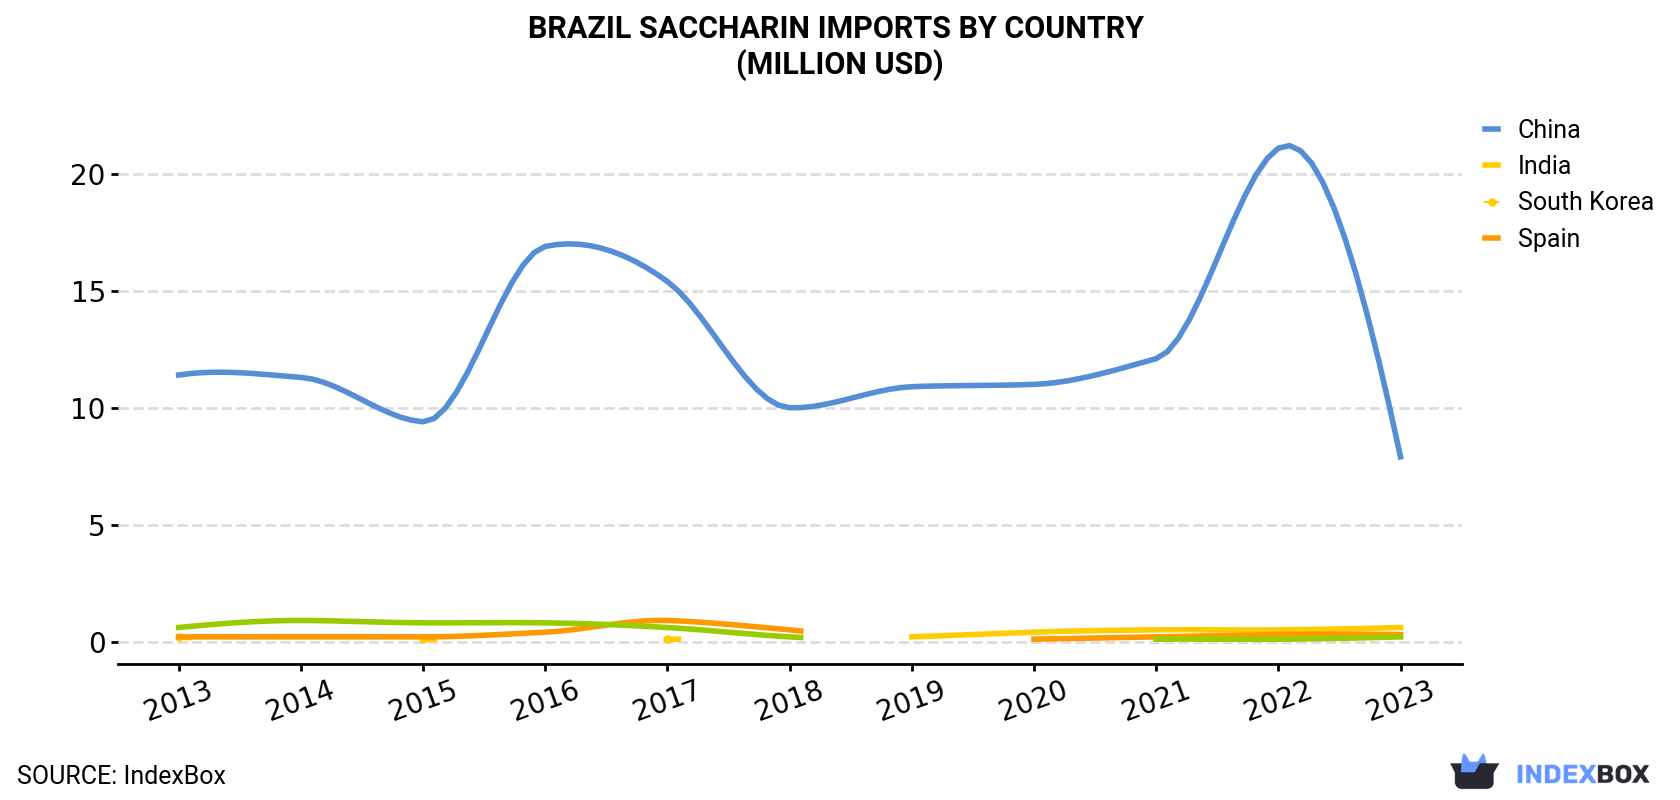 Brazil Saccharin Imports By Country (Million USD)